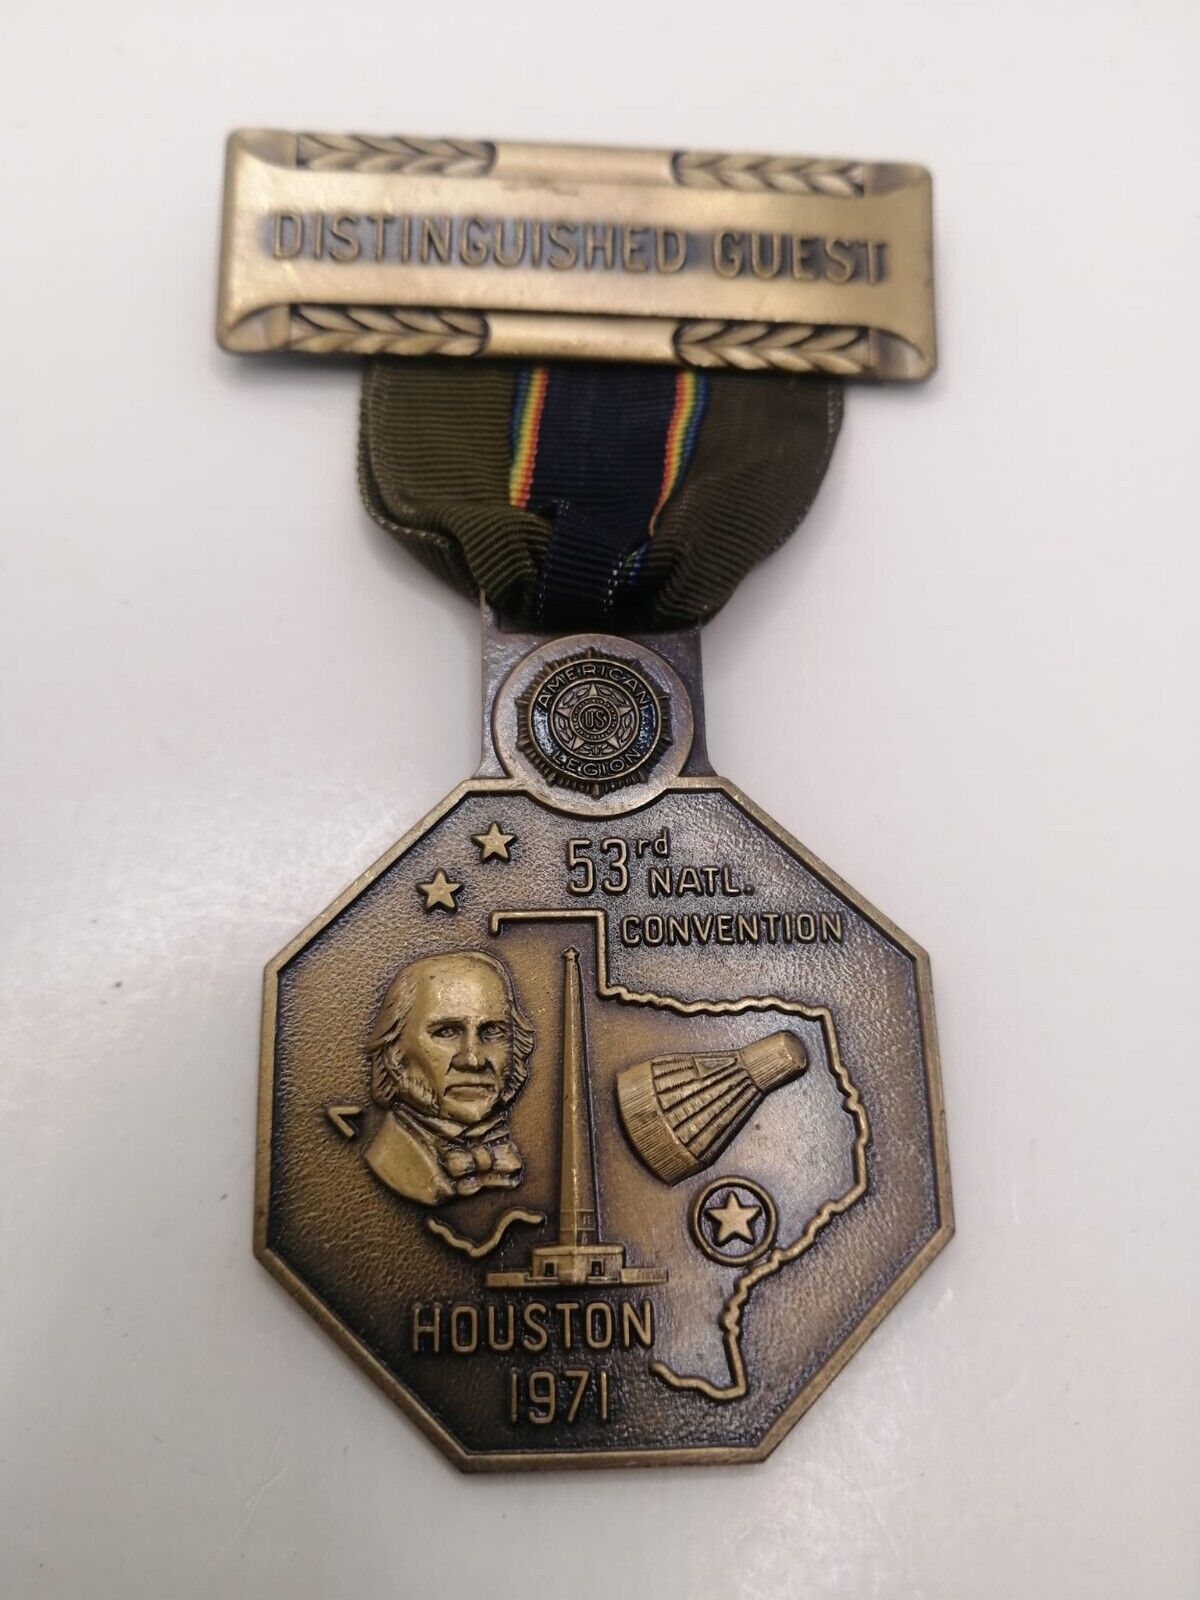 American Legion 53rd National Convention Medal 1971 Houston Distinguished Guest